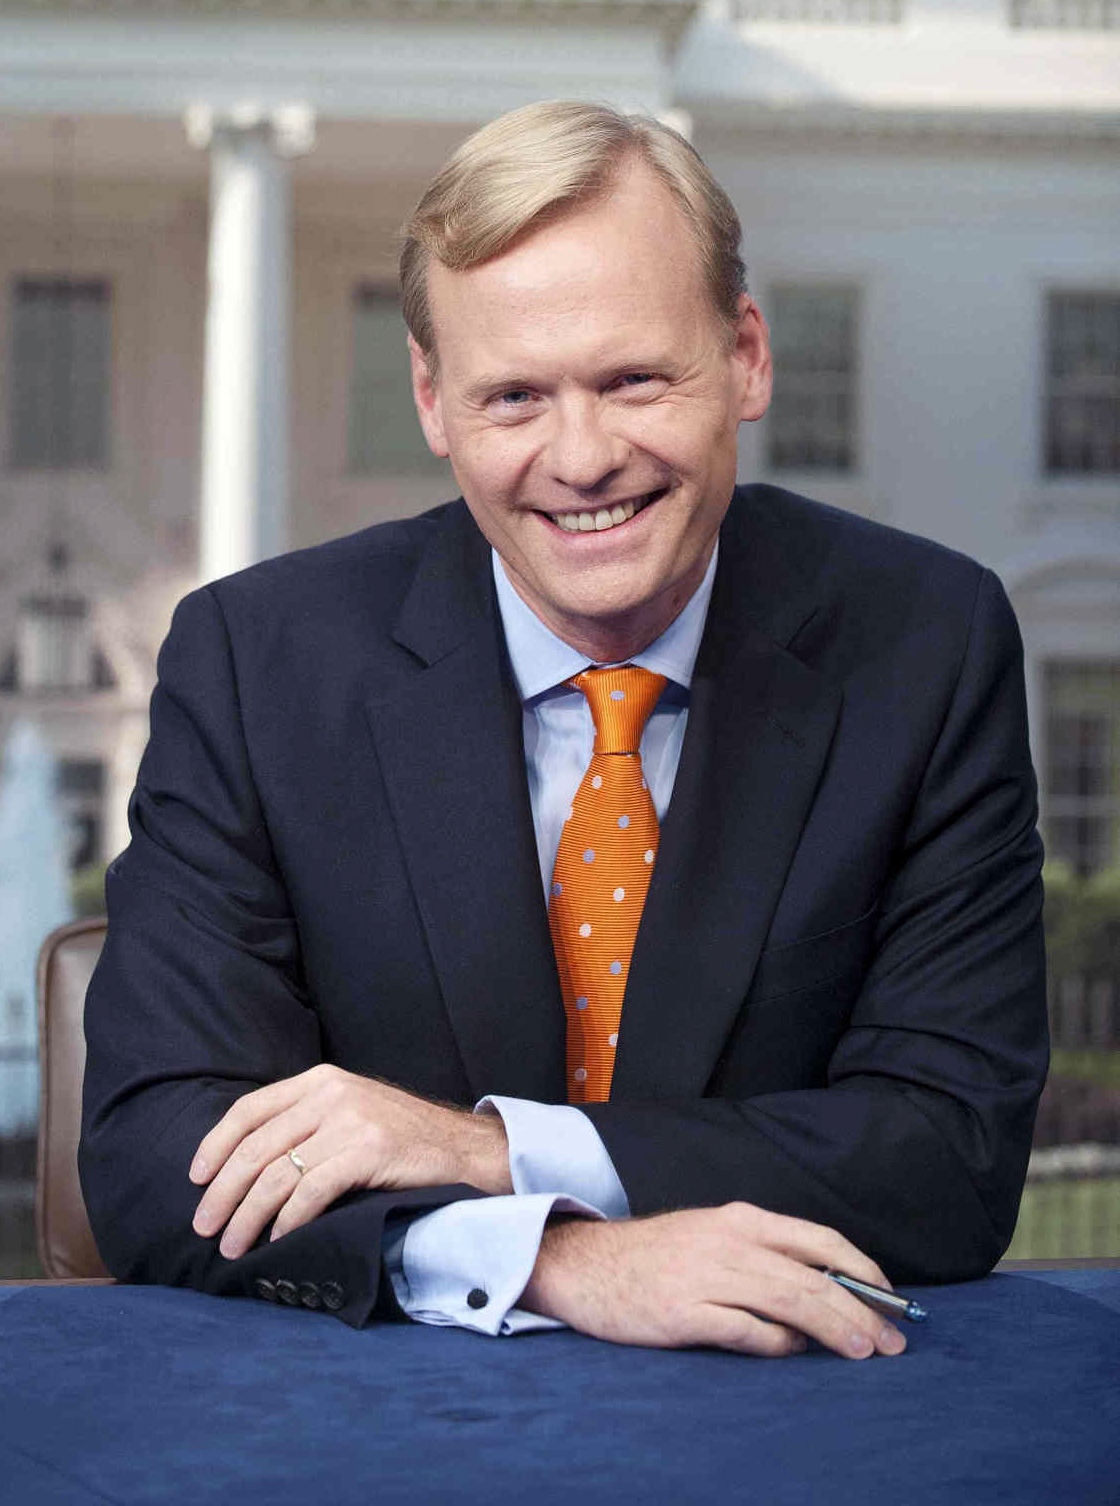 This 2012 photo provided by CBS News shows CBS News political director John Dickerson, in Washington. Dickerson will replace the retiring Bob Schieffer as moderator of "Face the Nation," Schieffer announced Sunday, April 12, 2015